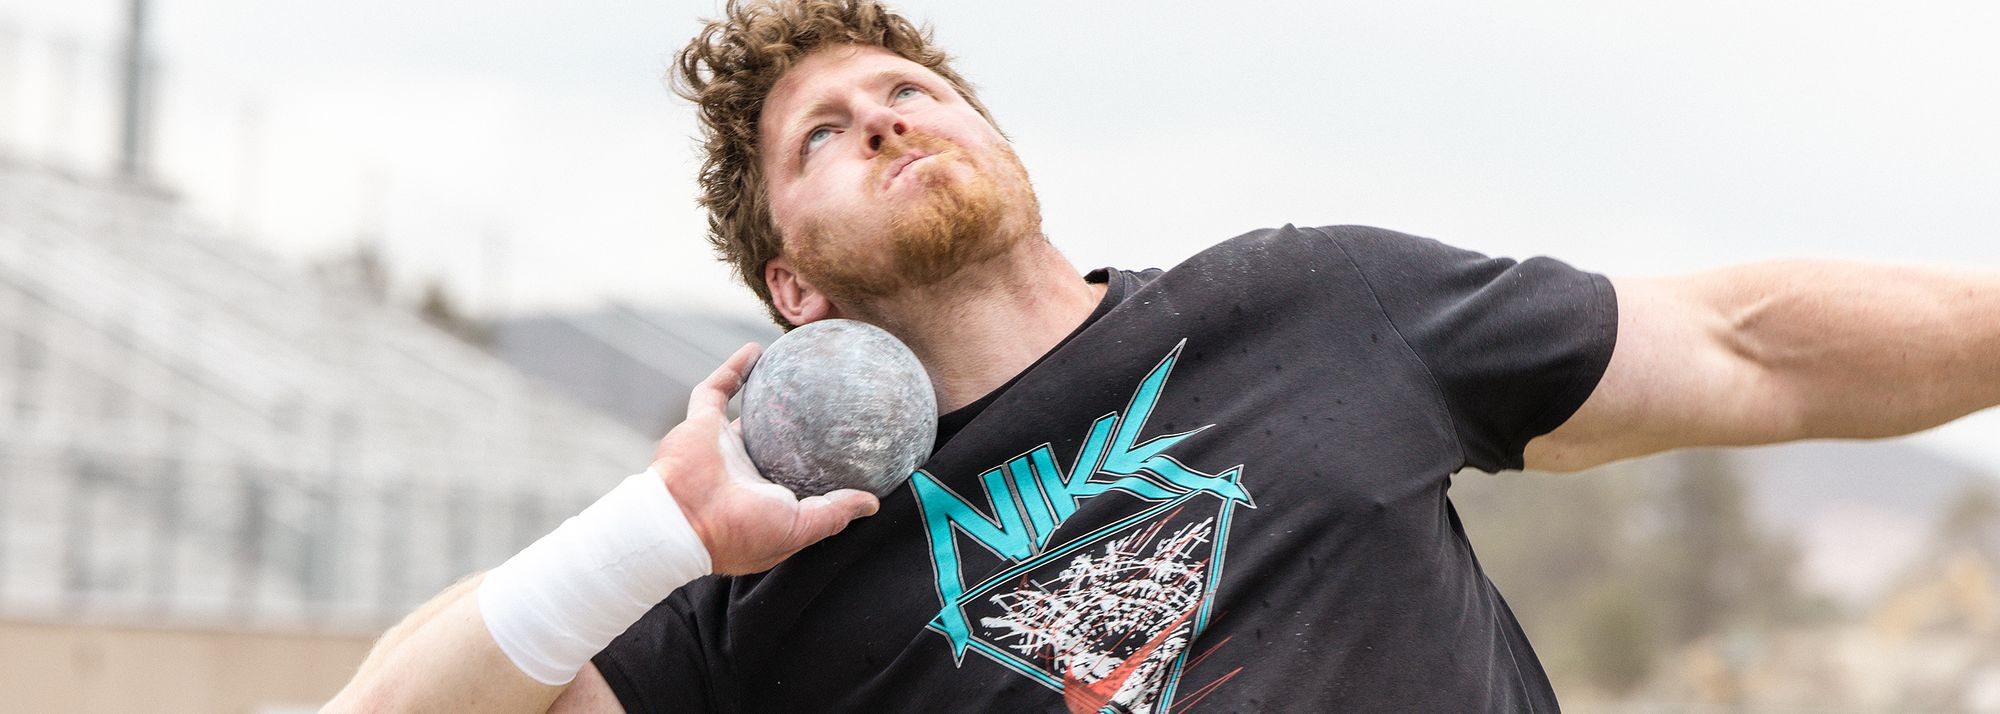 Here’s the thing about the perfect throw: it doesn’t exist. 